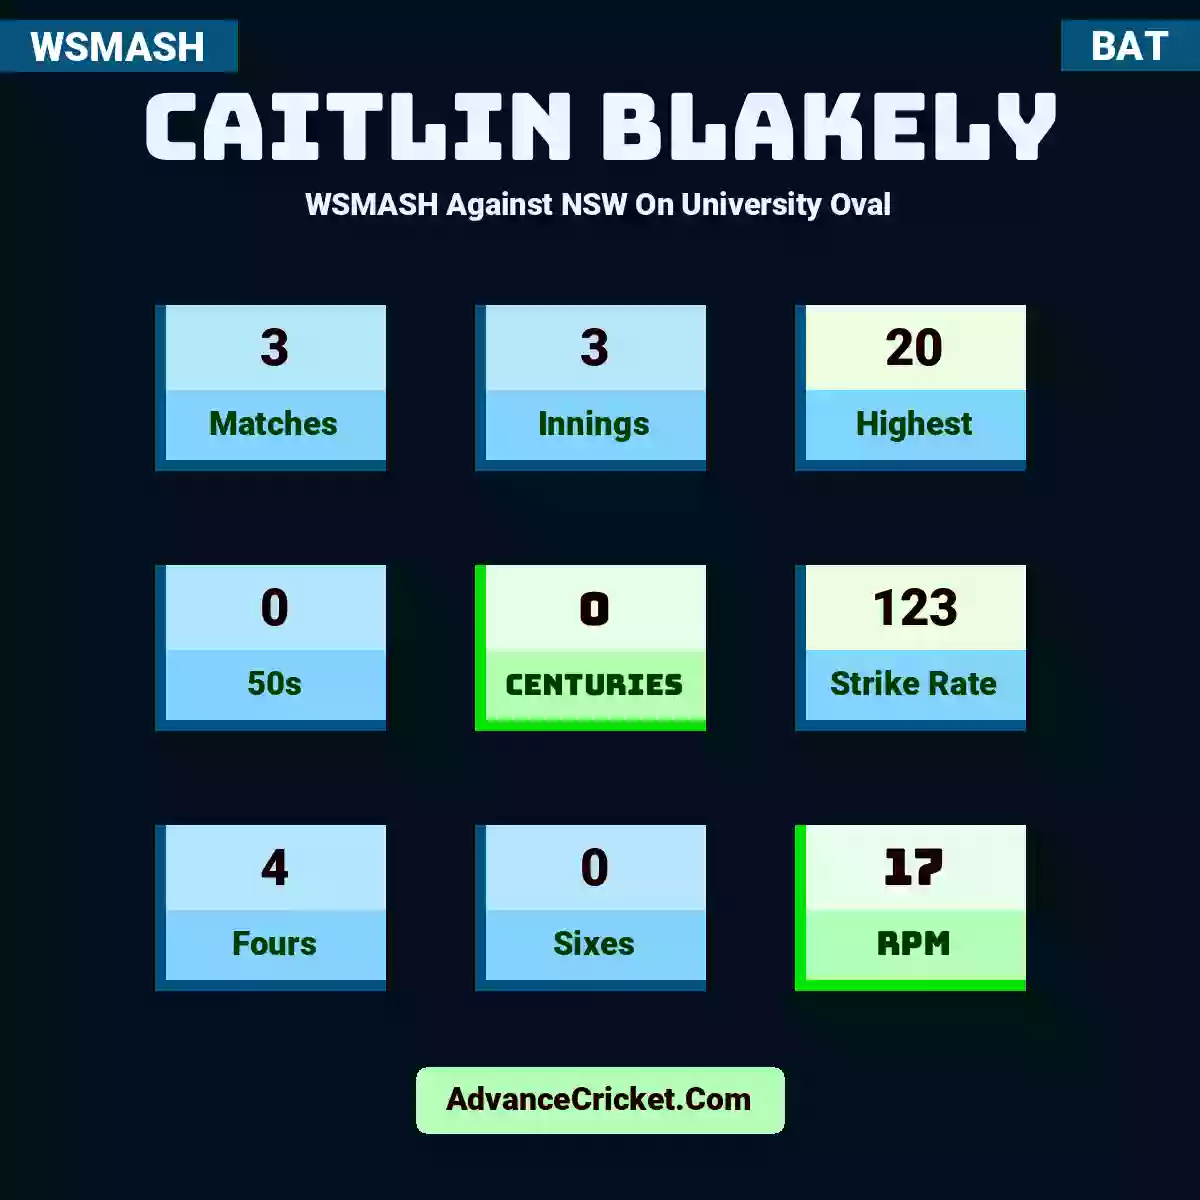 Caitlin Blakely WSMASH  Against NSW On University Oval, Caitlin Blakely played 3 matches, scored 20 runs as highest, 0 half-centuries, and 0 centuries, with a strike rate of 123. C.Blakely hit 4 fours and 0 sixes, with an RPM of 17.